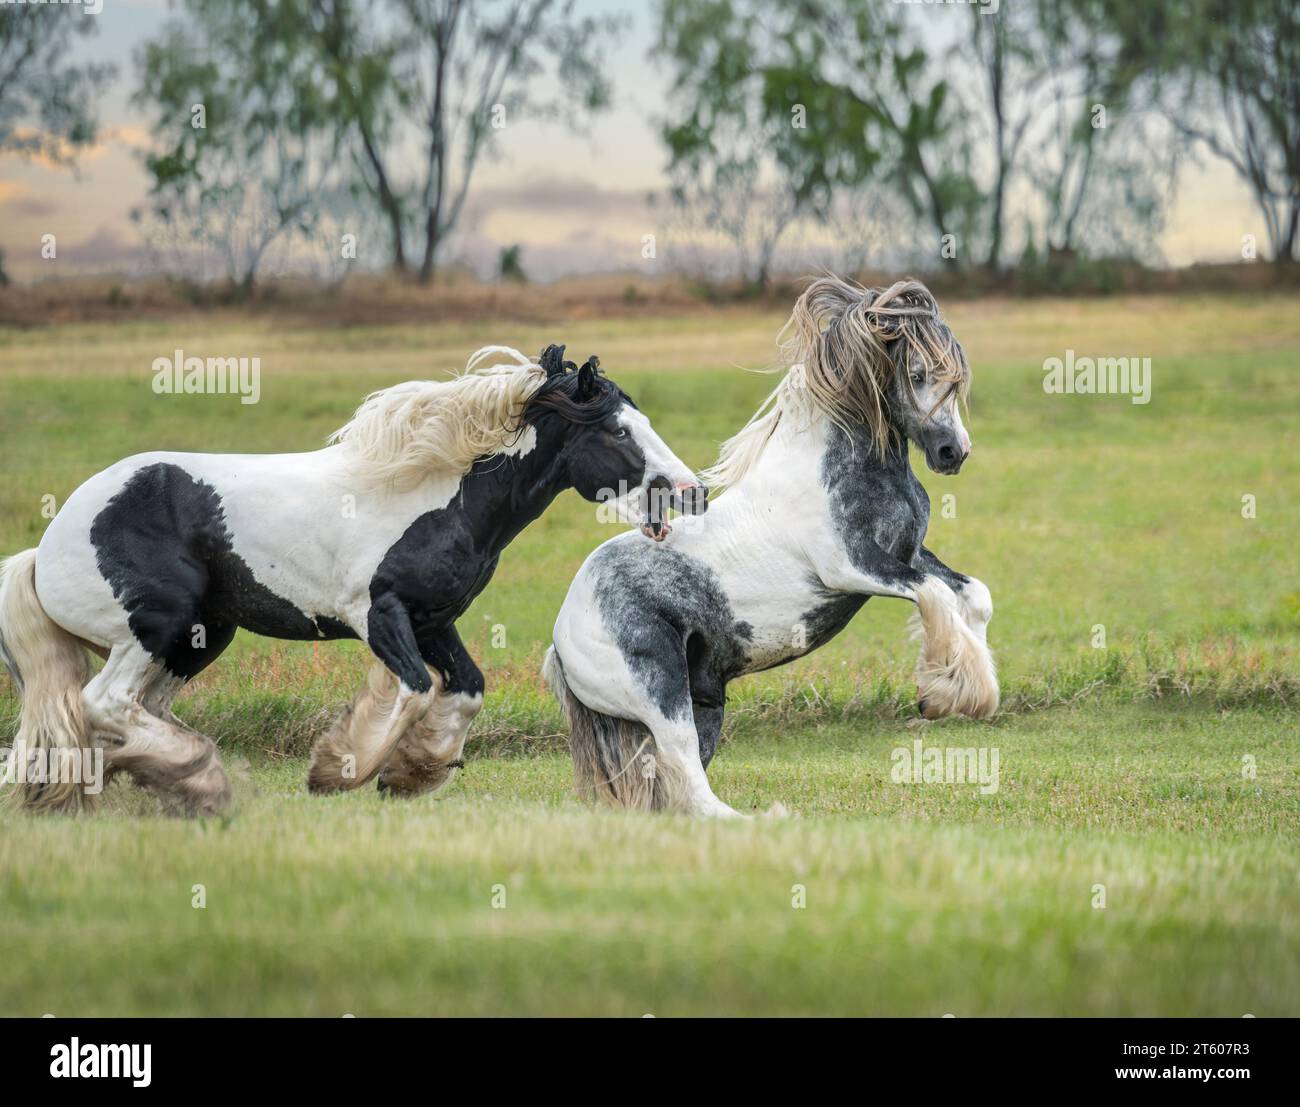 Gypsy Vanner Horse stallion buddies romp and play Stock Photo